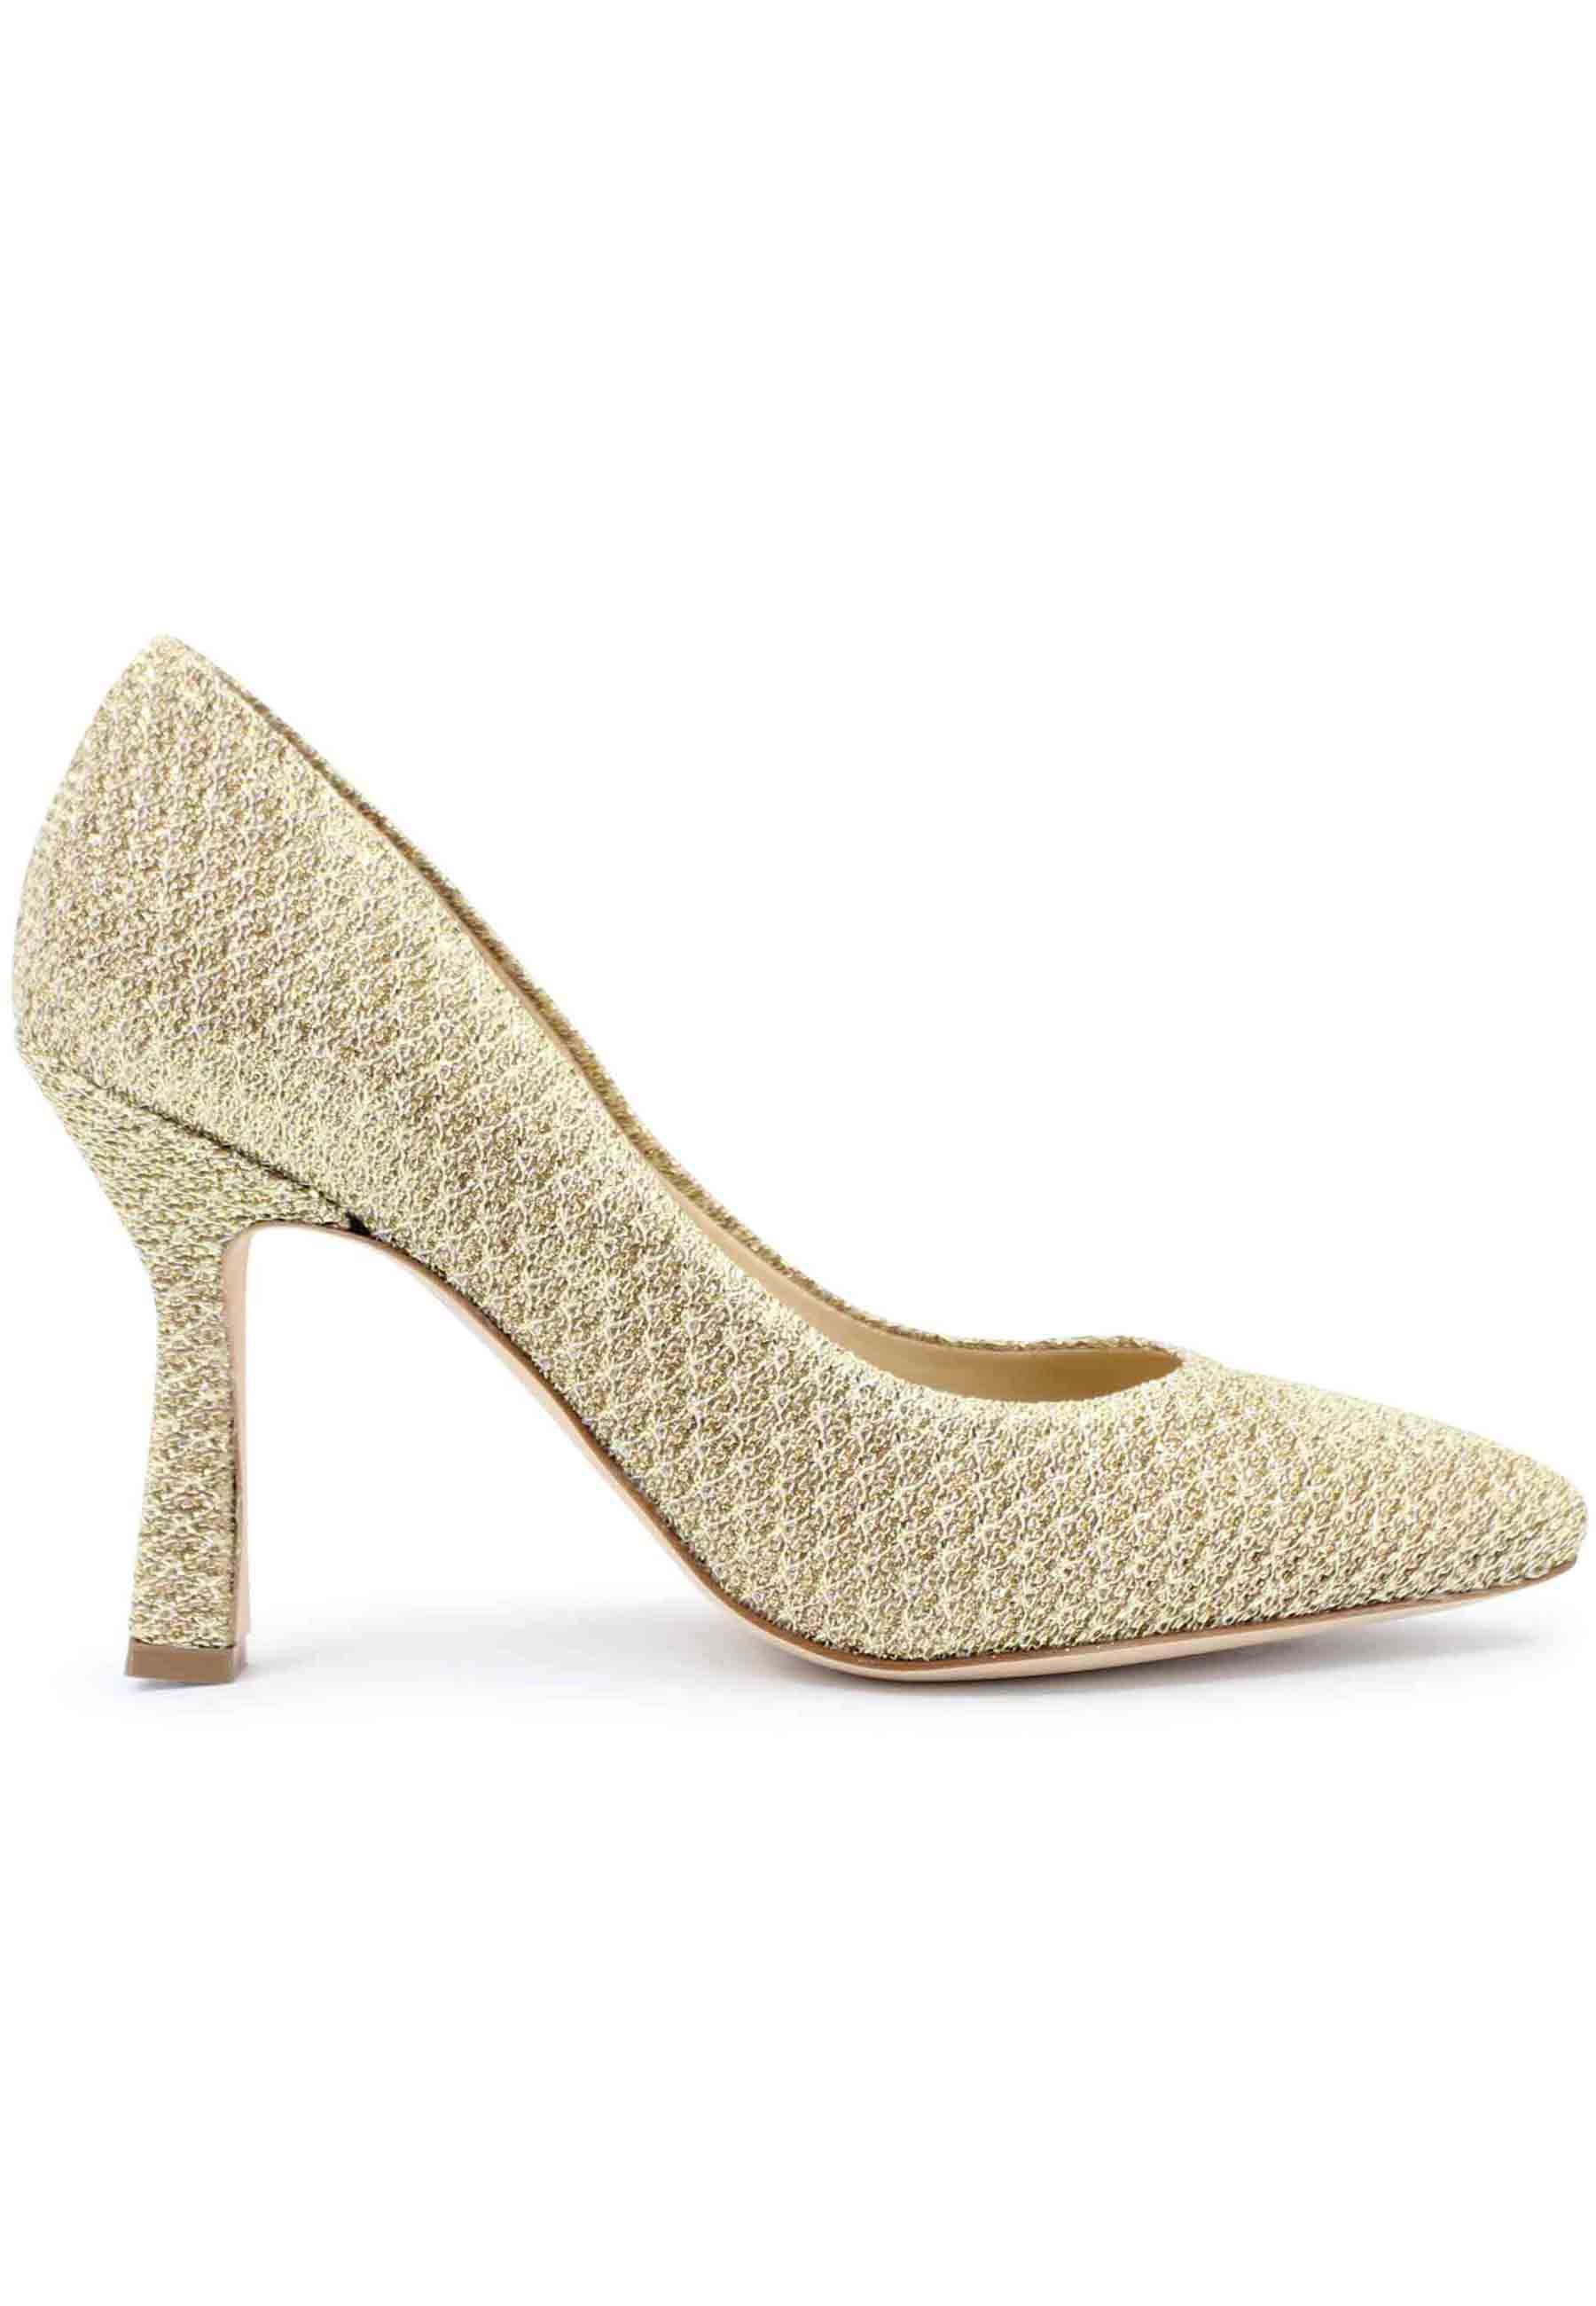 DE1002/RT pumps in gold Tolosa fabric with high heel